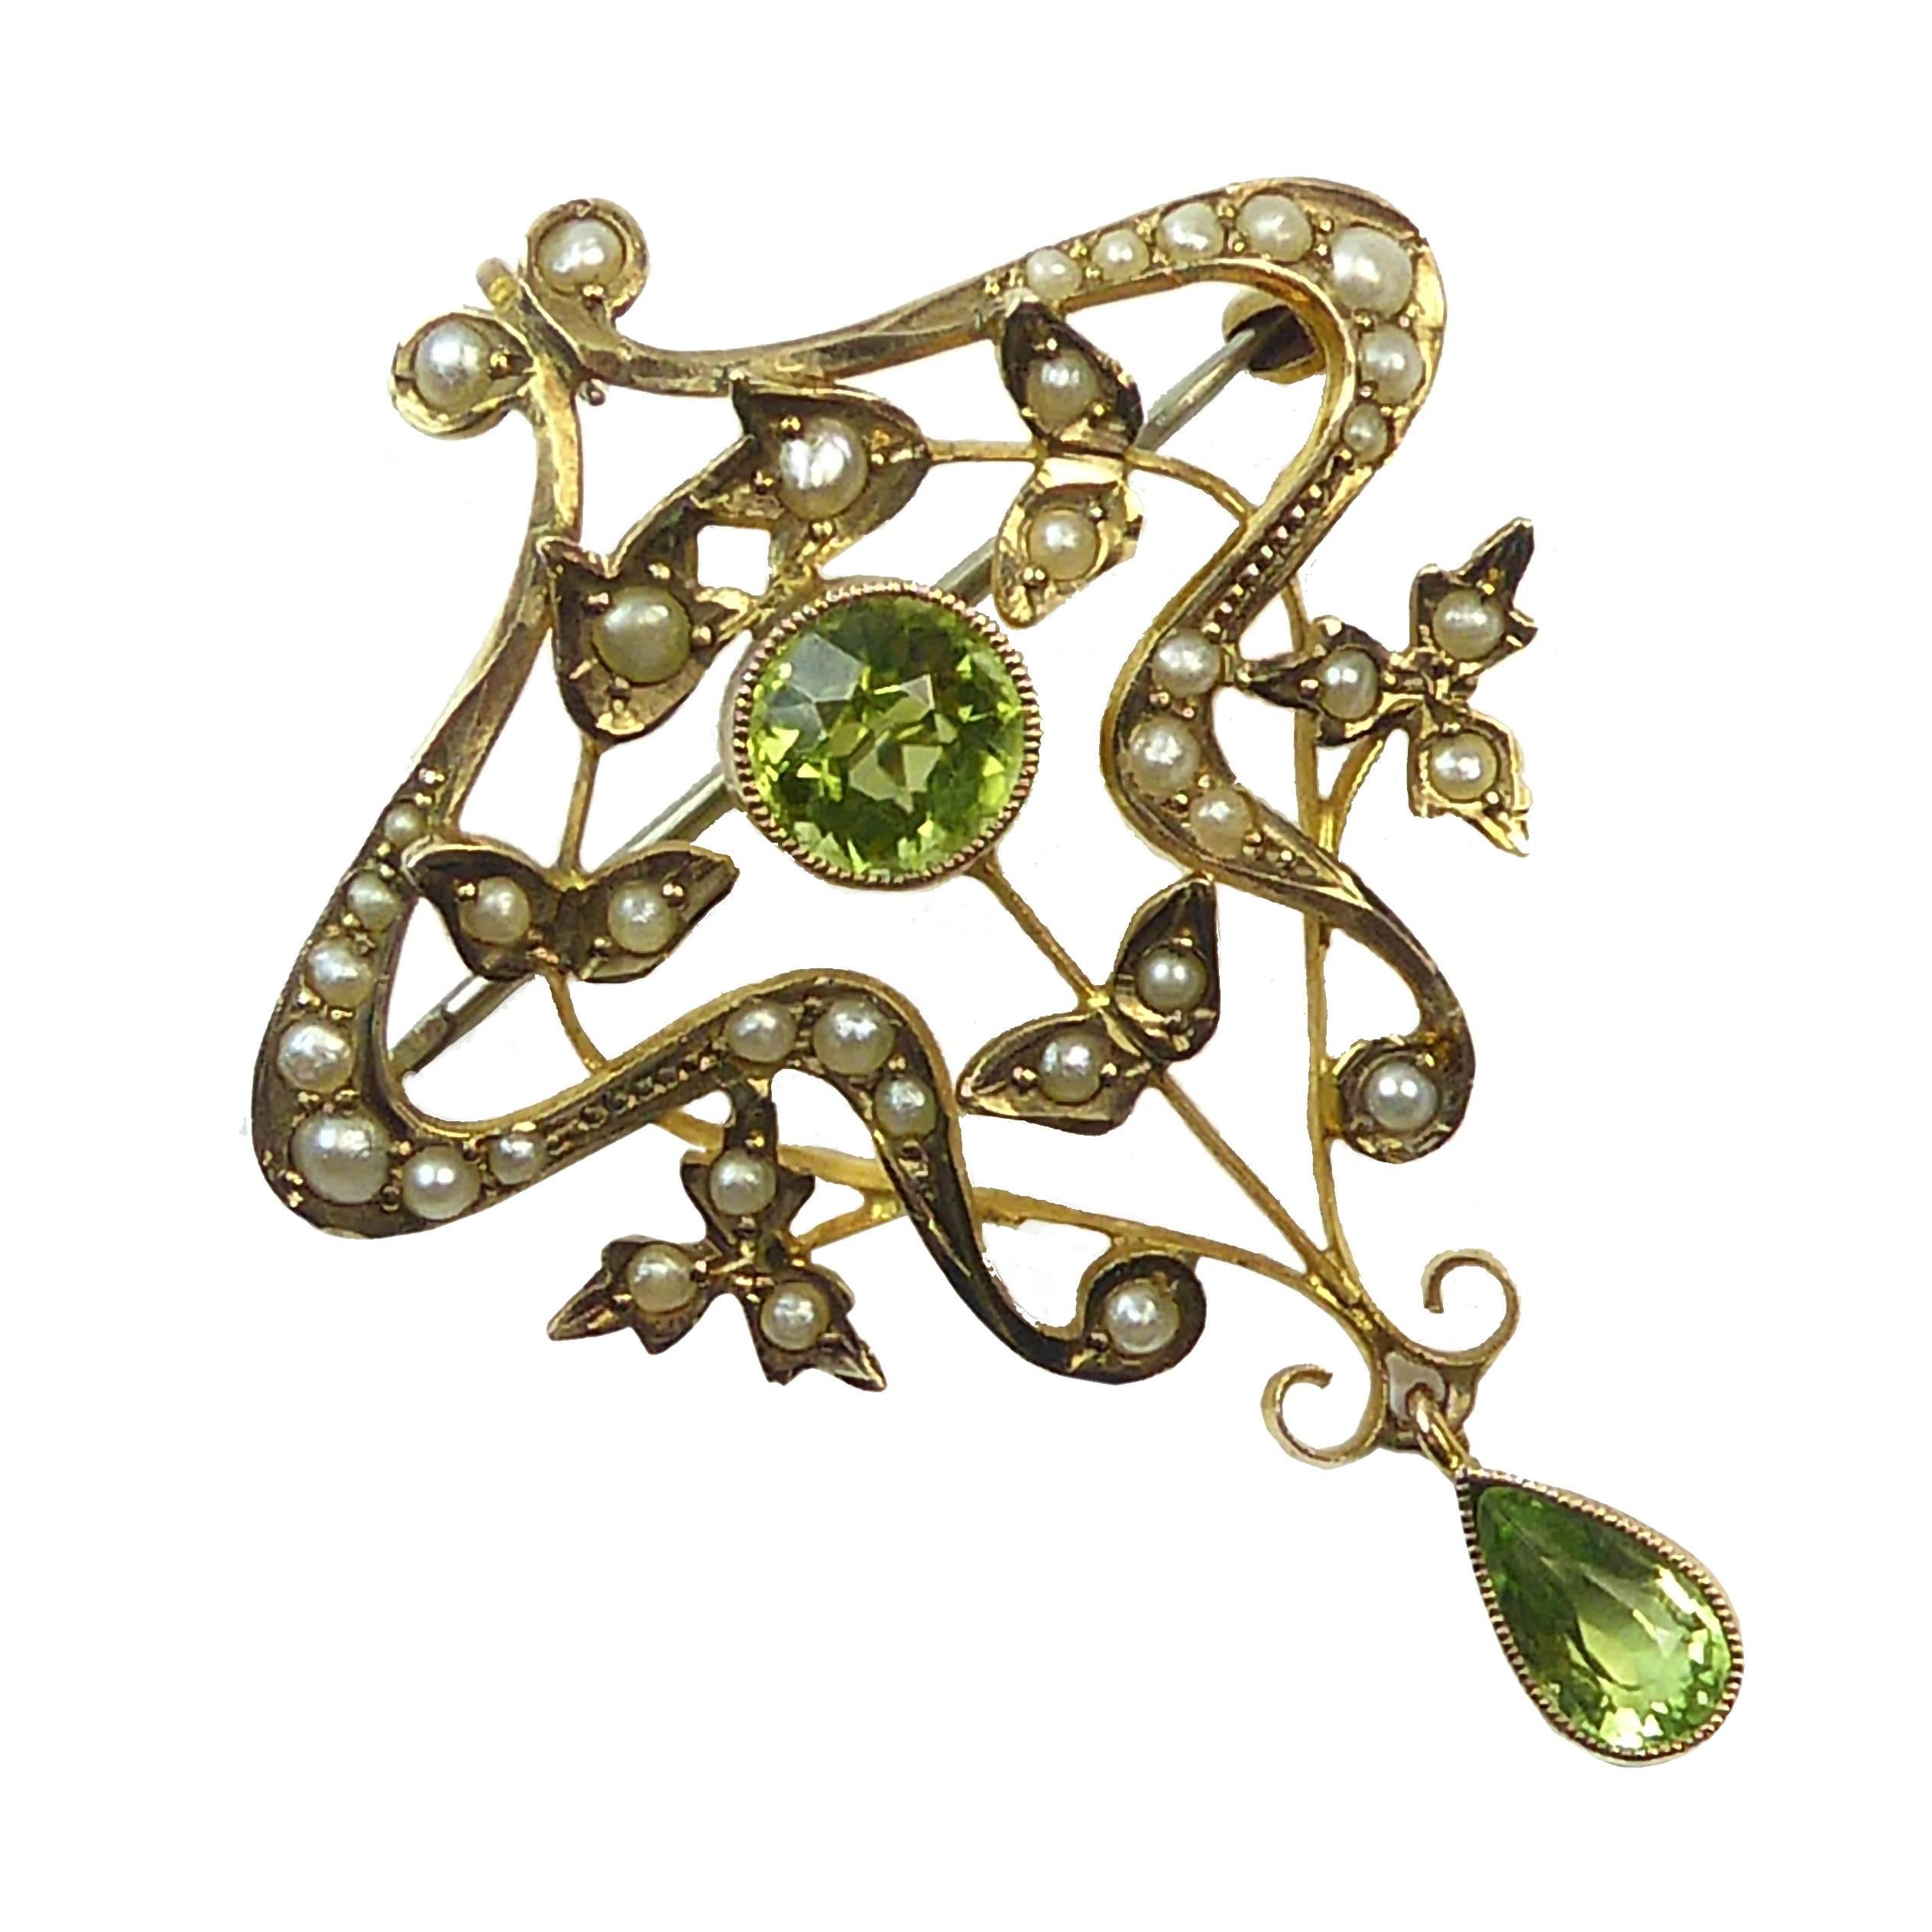 Antique Art Nouveau Pendant Brooch with Peridots and Pearls, circa 1900 1